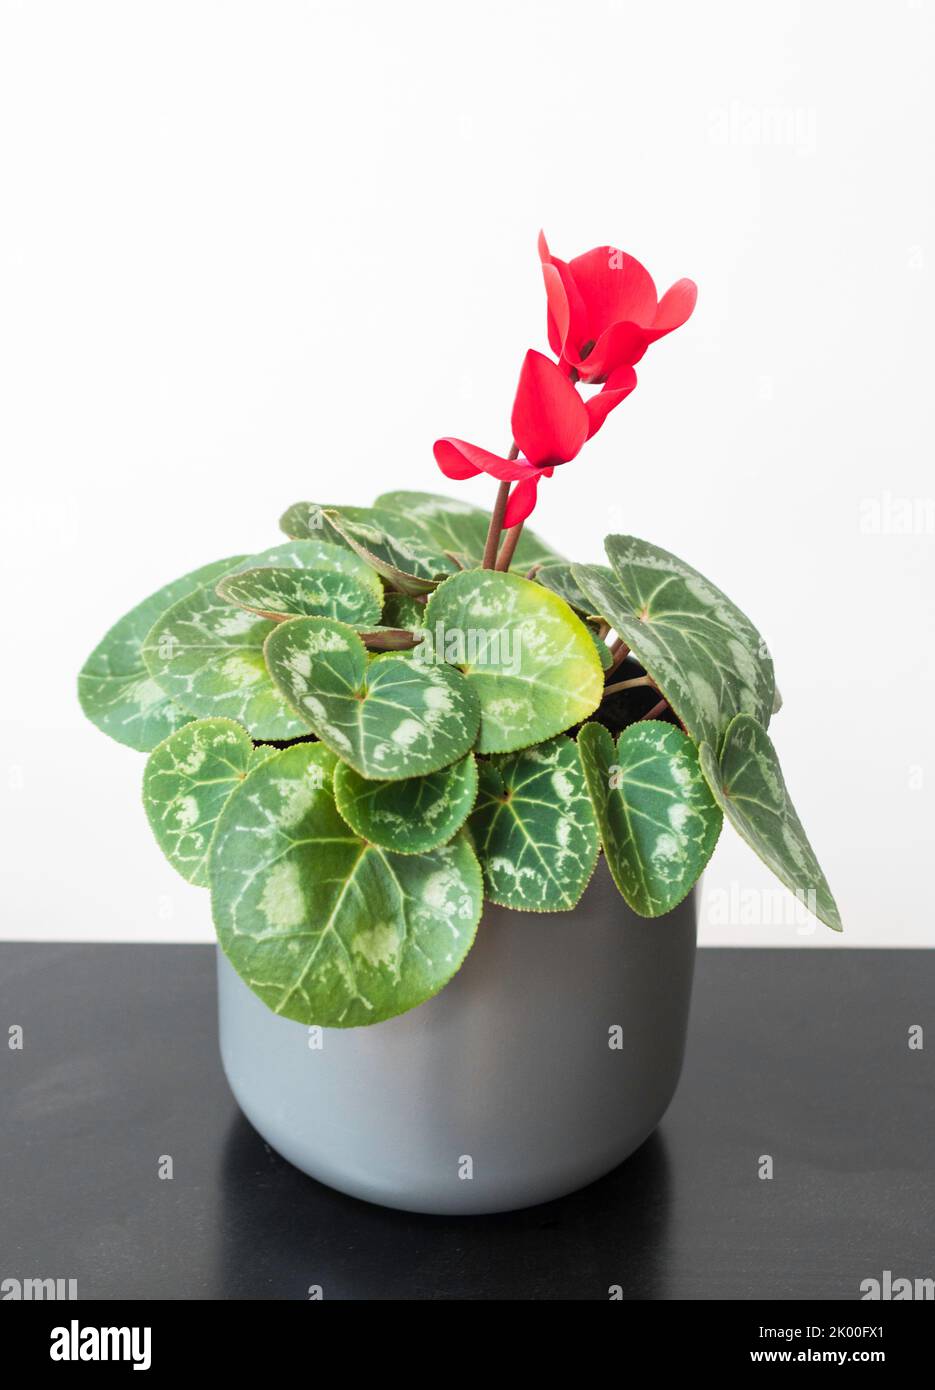 Red flowered house plant Cyclamen Latinia in a grey pot, against a white background Stock Photo